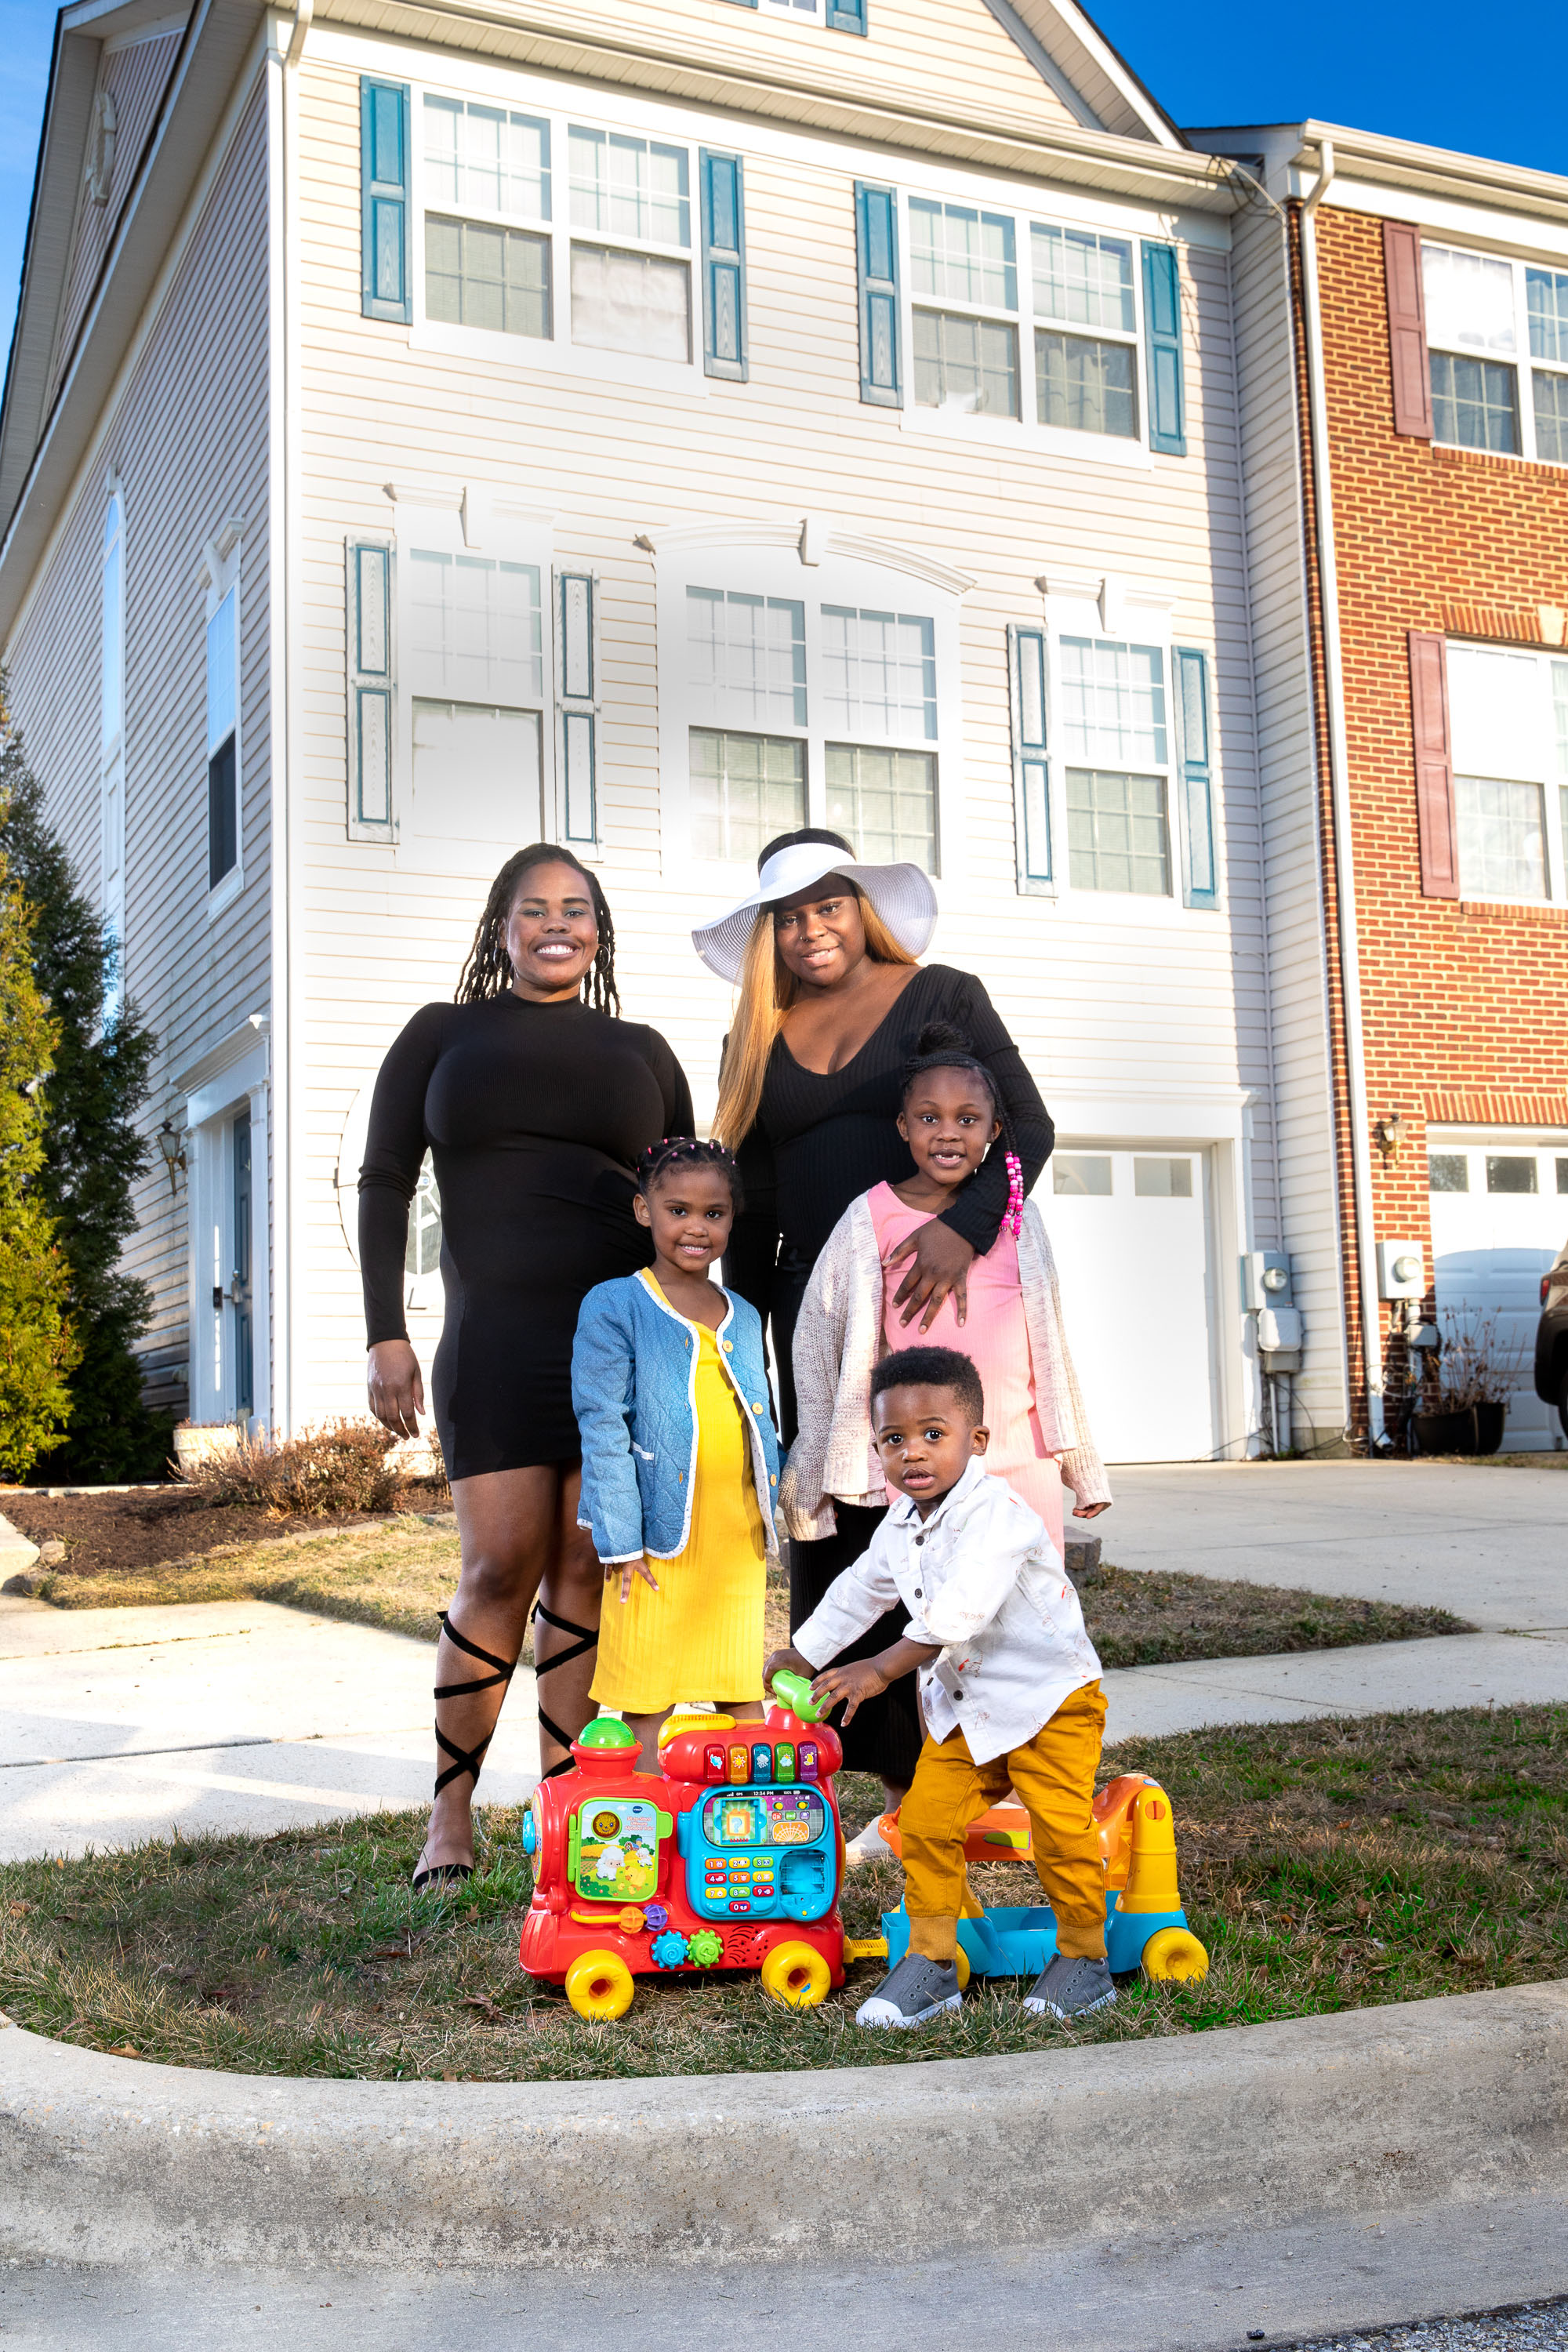 (L-R) Raquel Poindexter and sister De'Ja Irvin with her children: Cassiah Irvin (in yellow) , Cassidy Irvin (in pink), and R'eighn Irvin (train) gather for a family photo outside their new residence in highly sought-after community in Brandywine, Maryland.